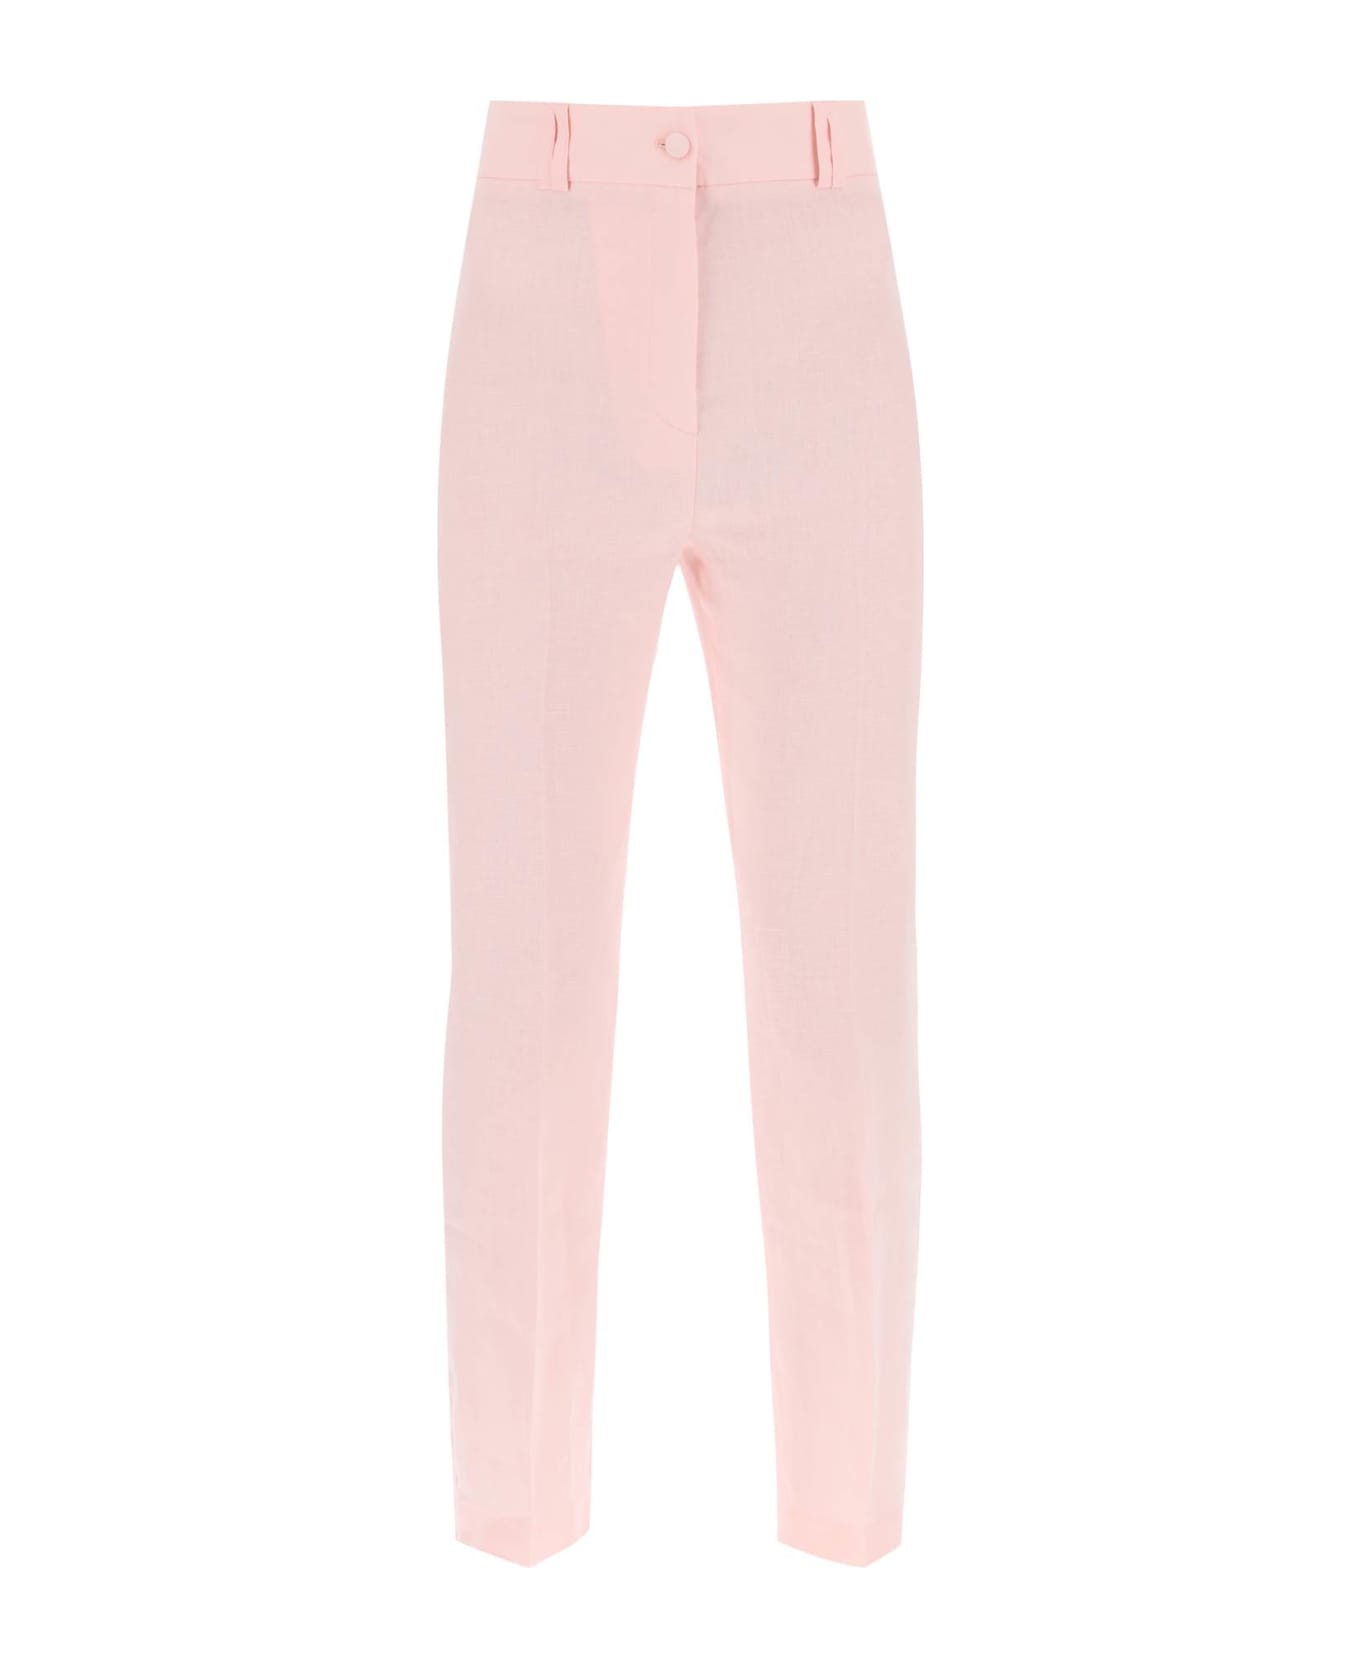 Hebe Studio 'loulou' Linen Trousers - PINK CALYPSO (Pink) ボトムス